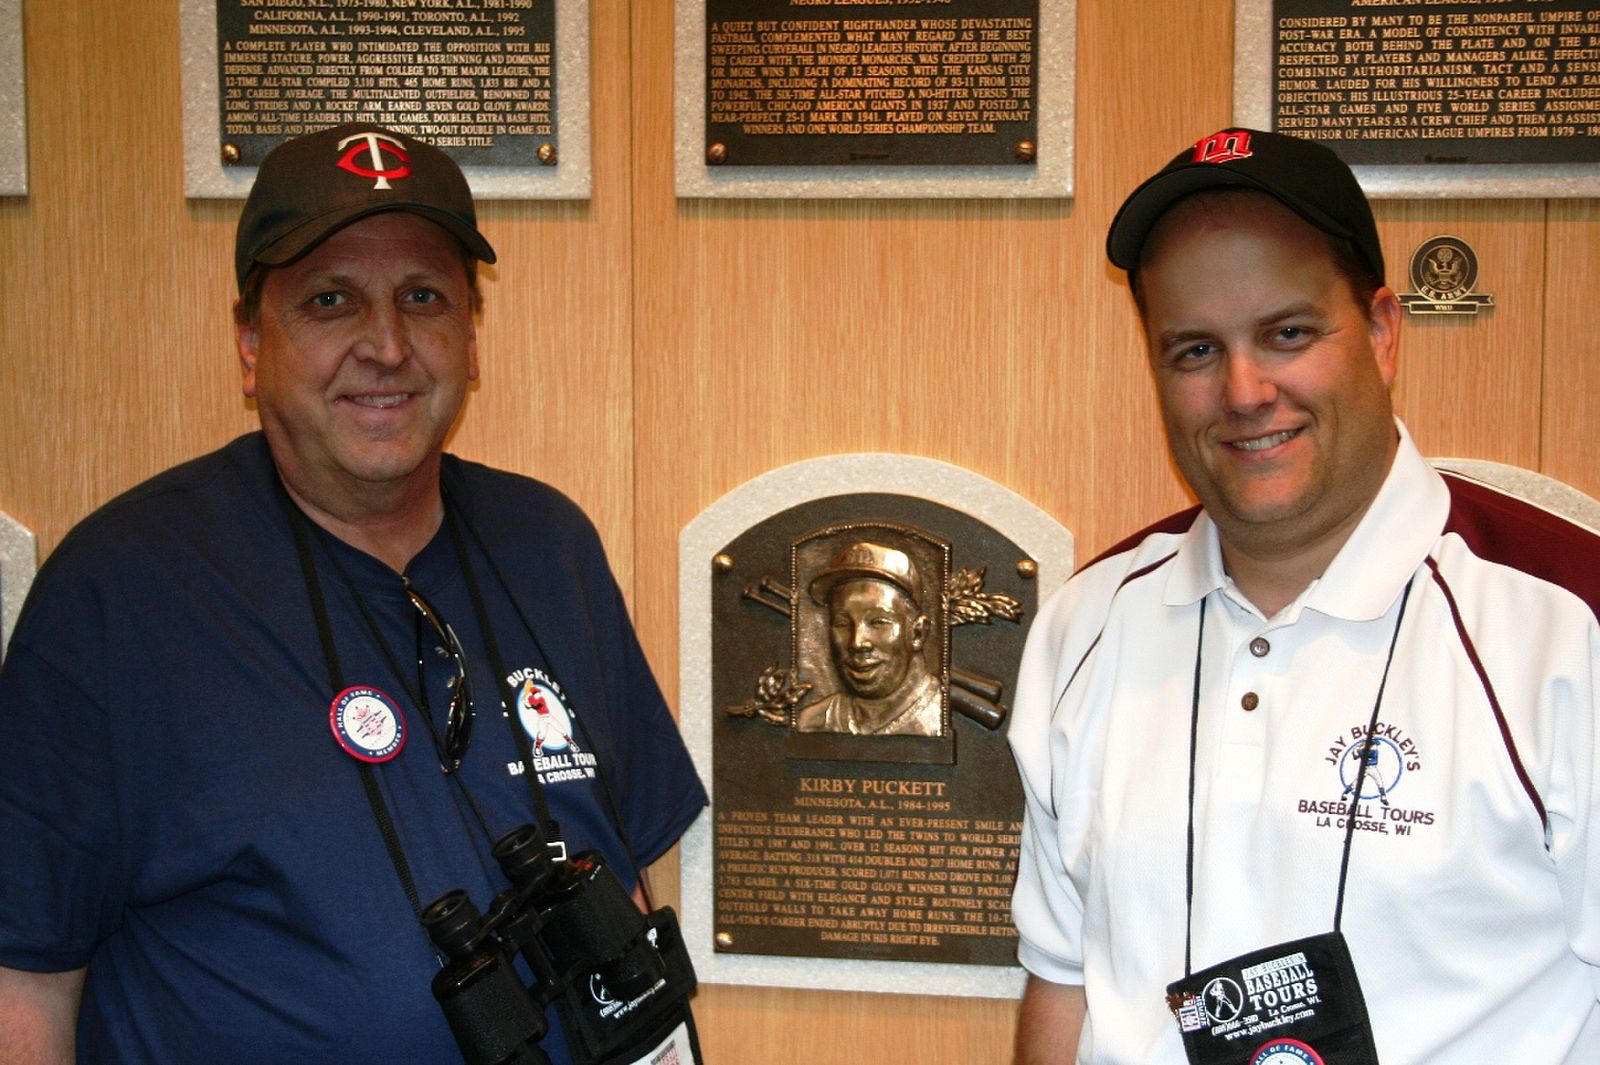 Here we are in front of Kirby Puckett's plaque.